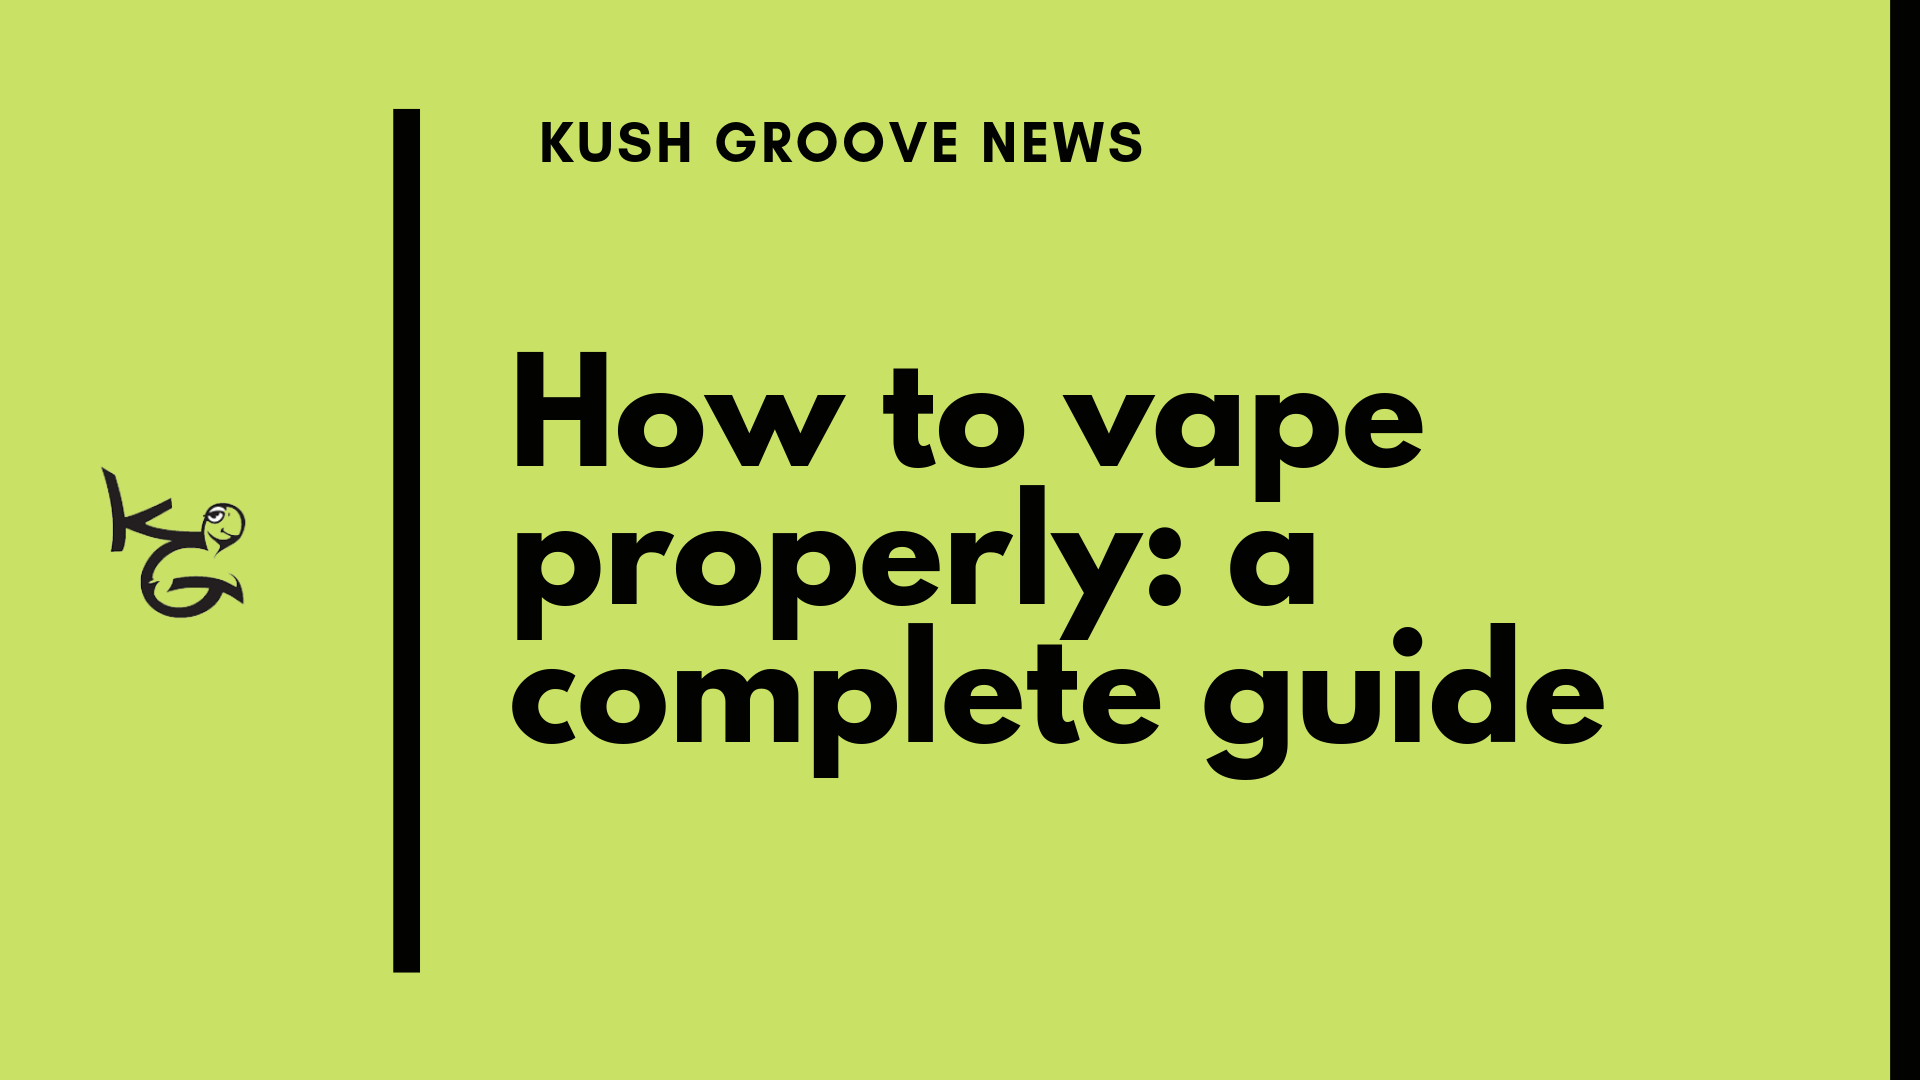 Don't Risk Your Day Job Smelling Like Weed, Learn How to Vape Properly